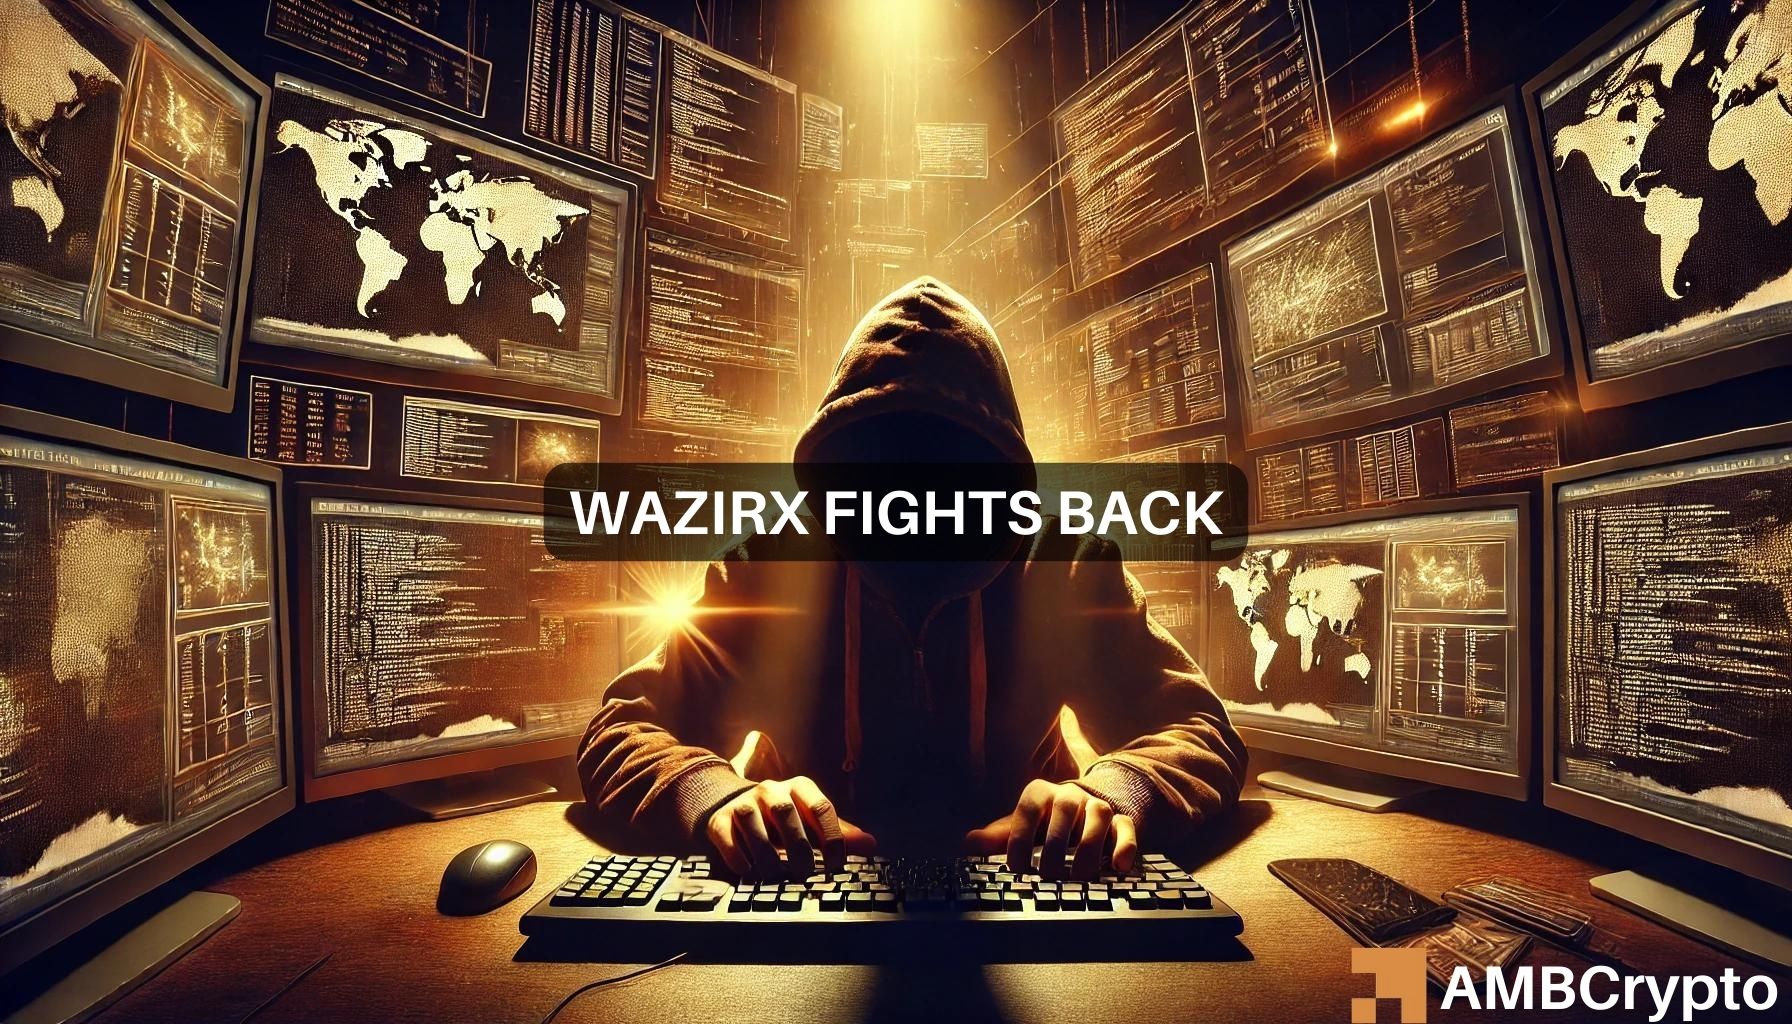 Hack alert: WazirX loses $230M, launches asset recovery bounty